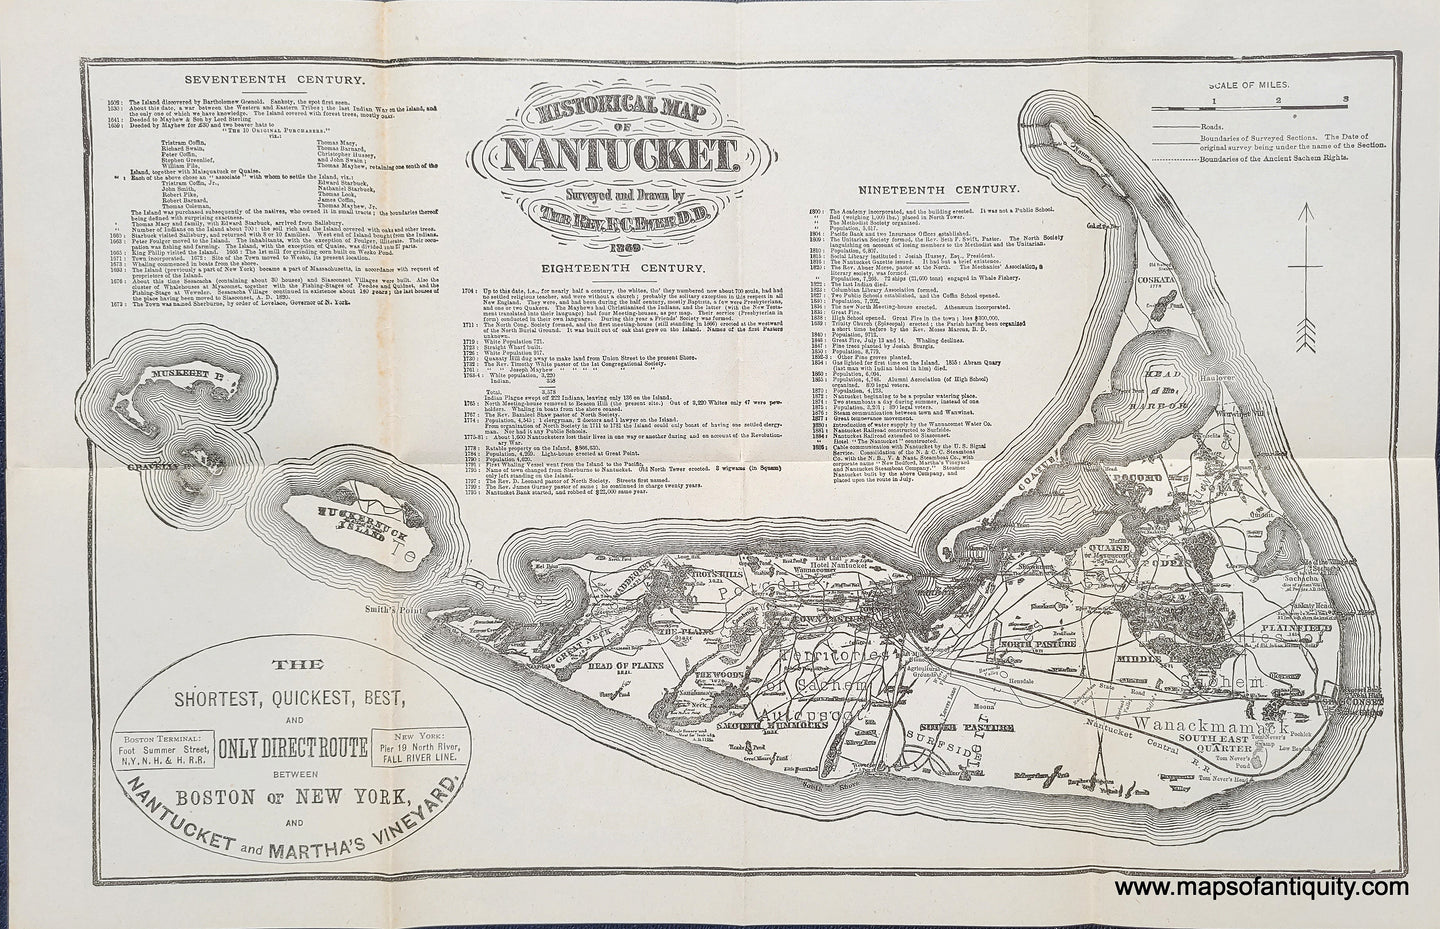 Antique-Black-and-White-Map-Historical-Map-of-Nantucket-**********-United-States-Cape-Cod-and-Islands-1880-Ewer-Maps-Of-Antiquity